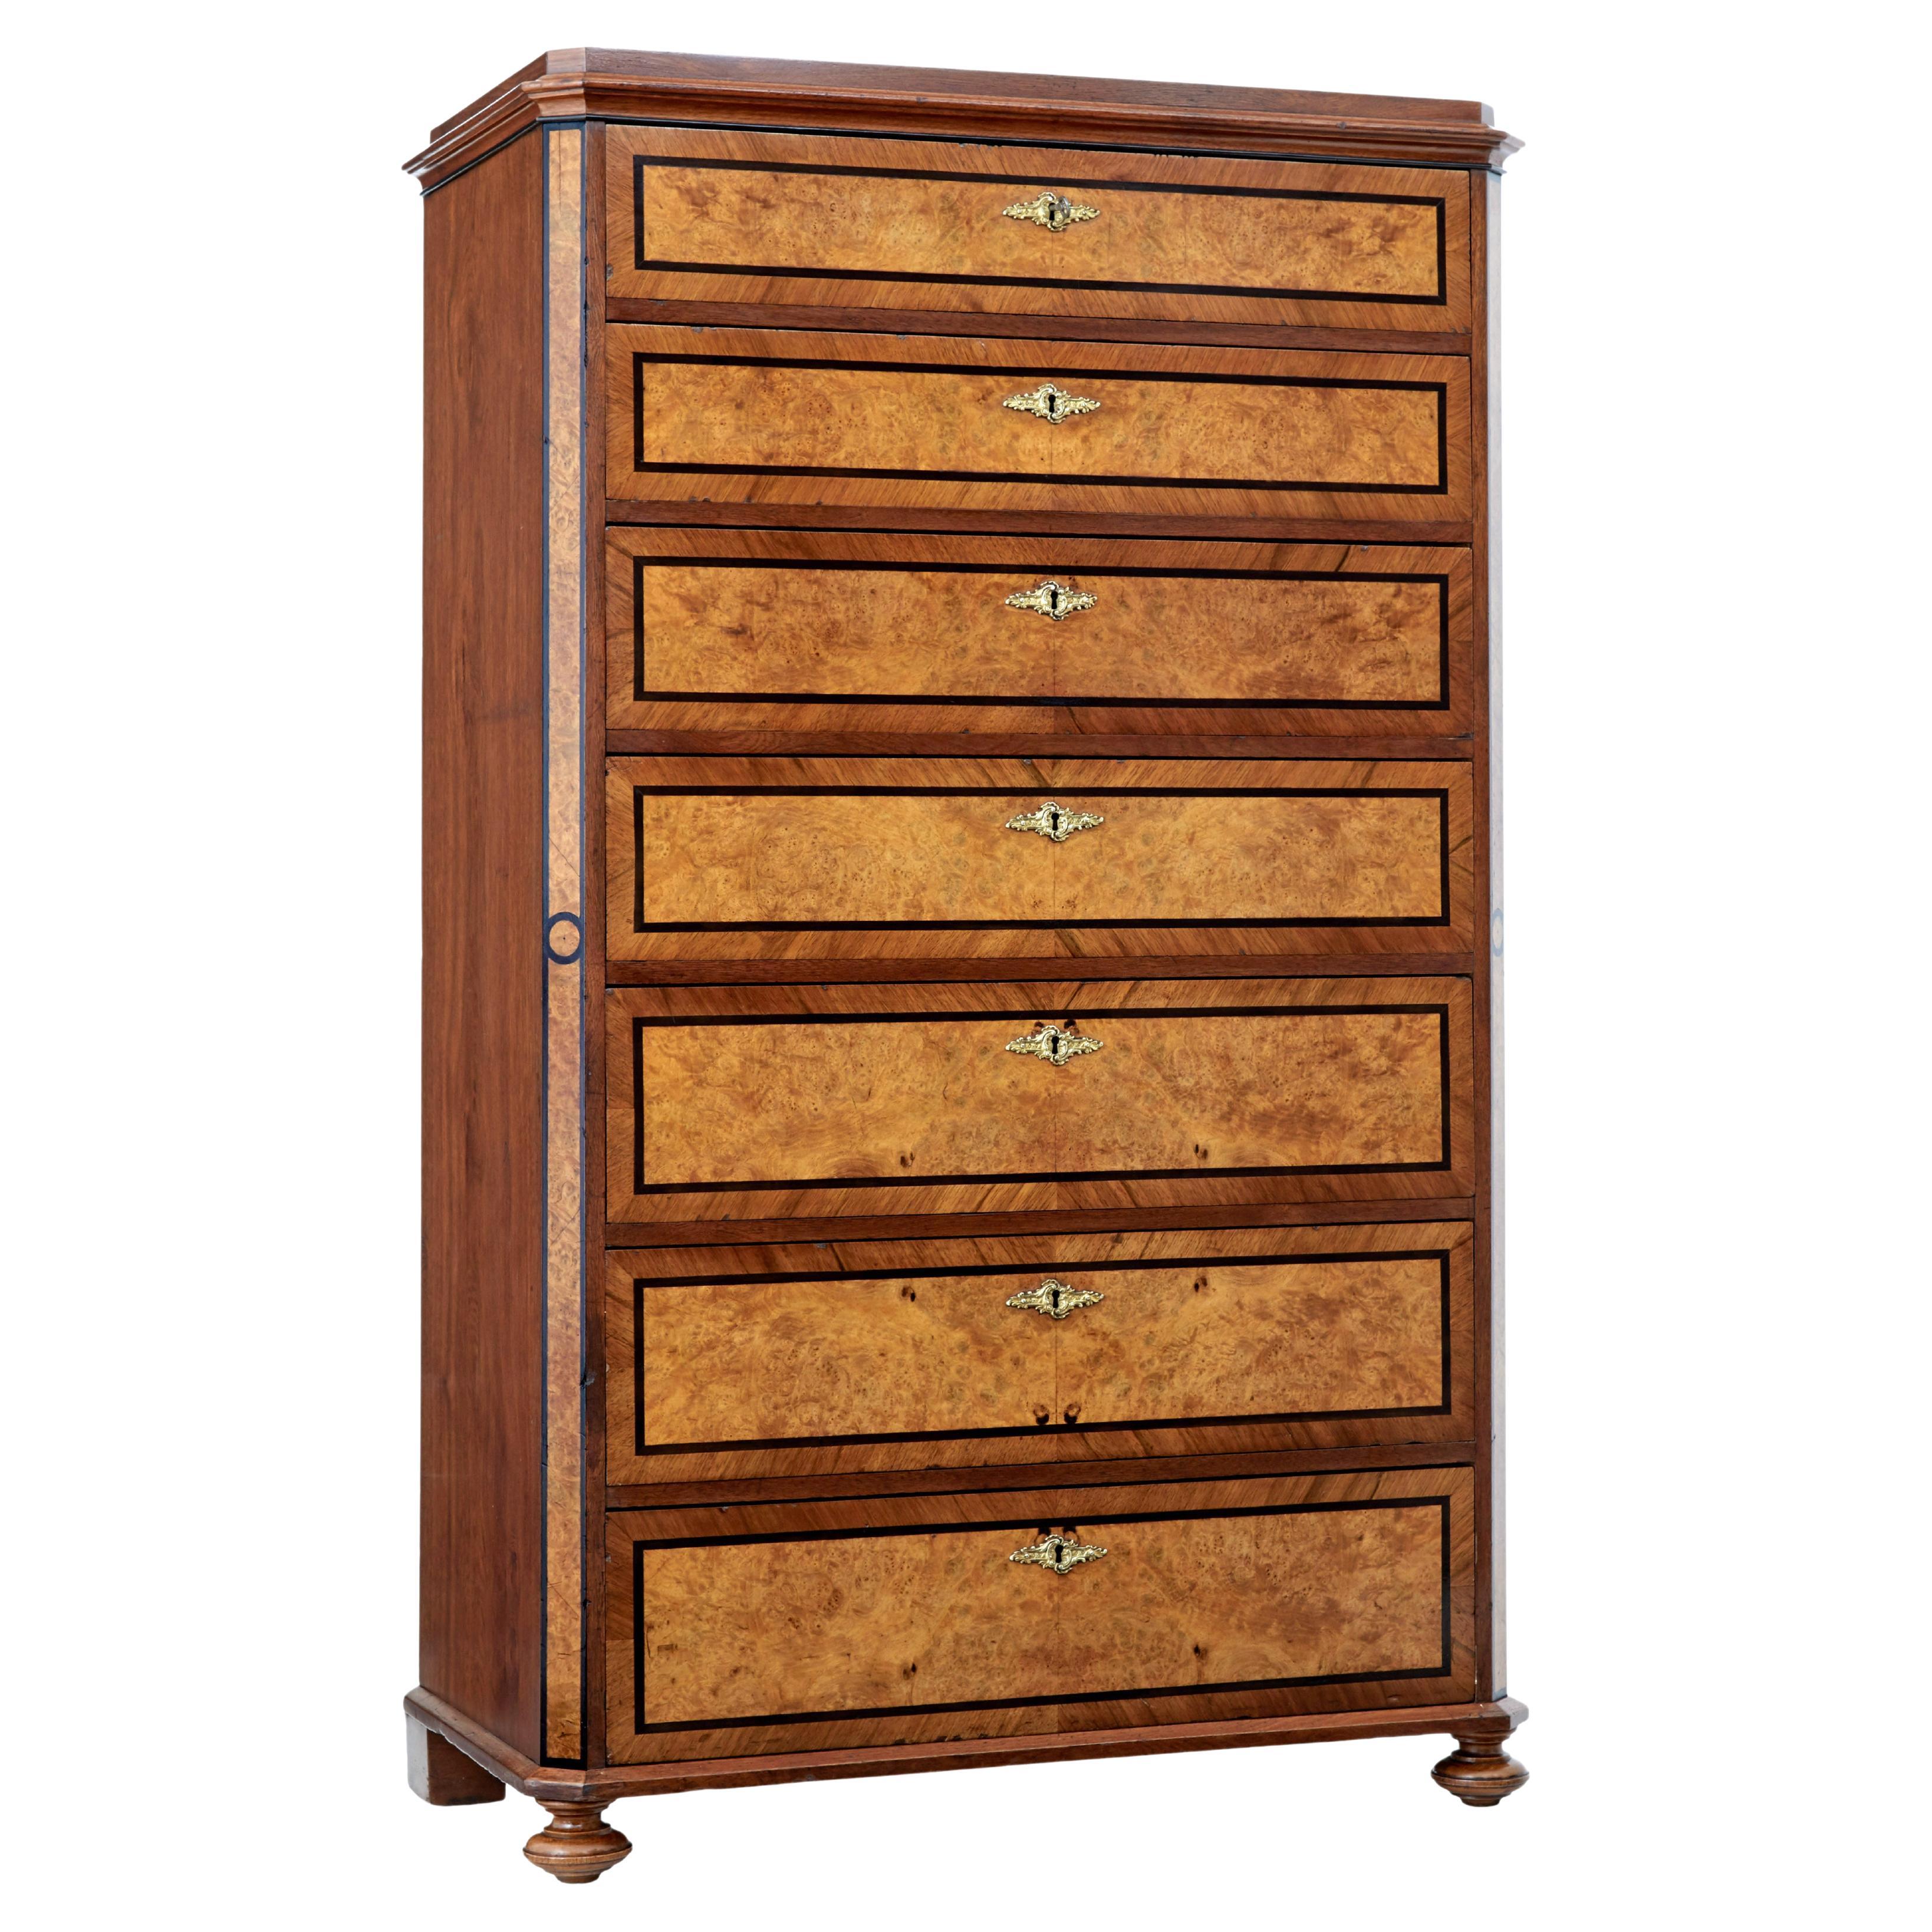 19th Century burr walnut tall chest of drawers For Sale